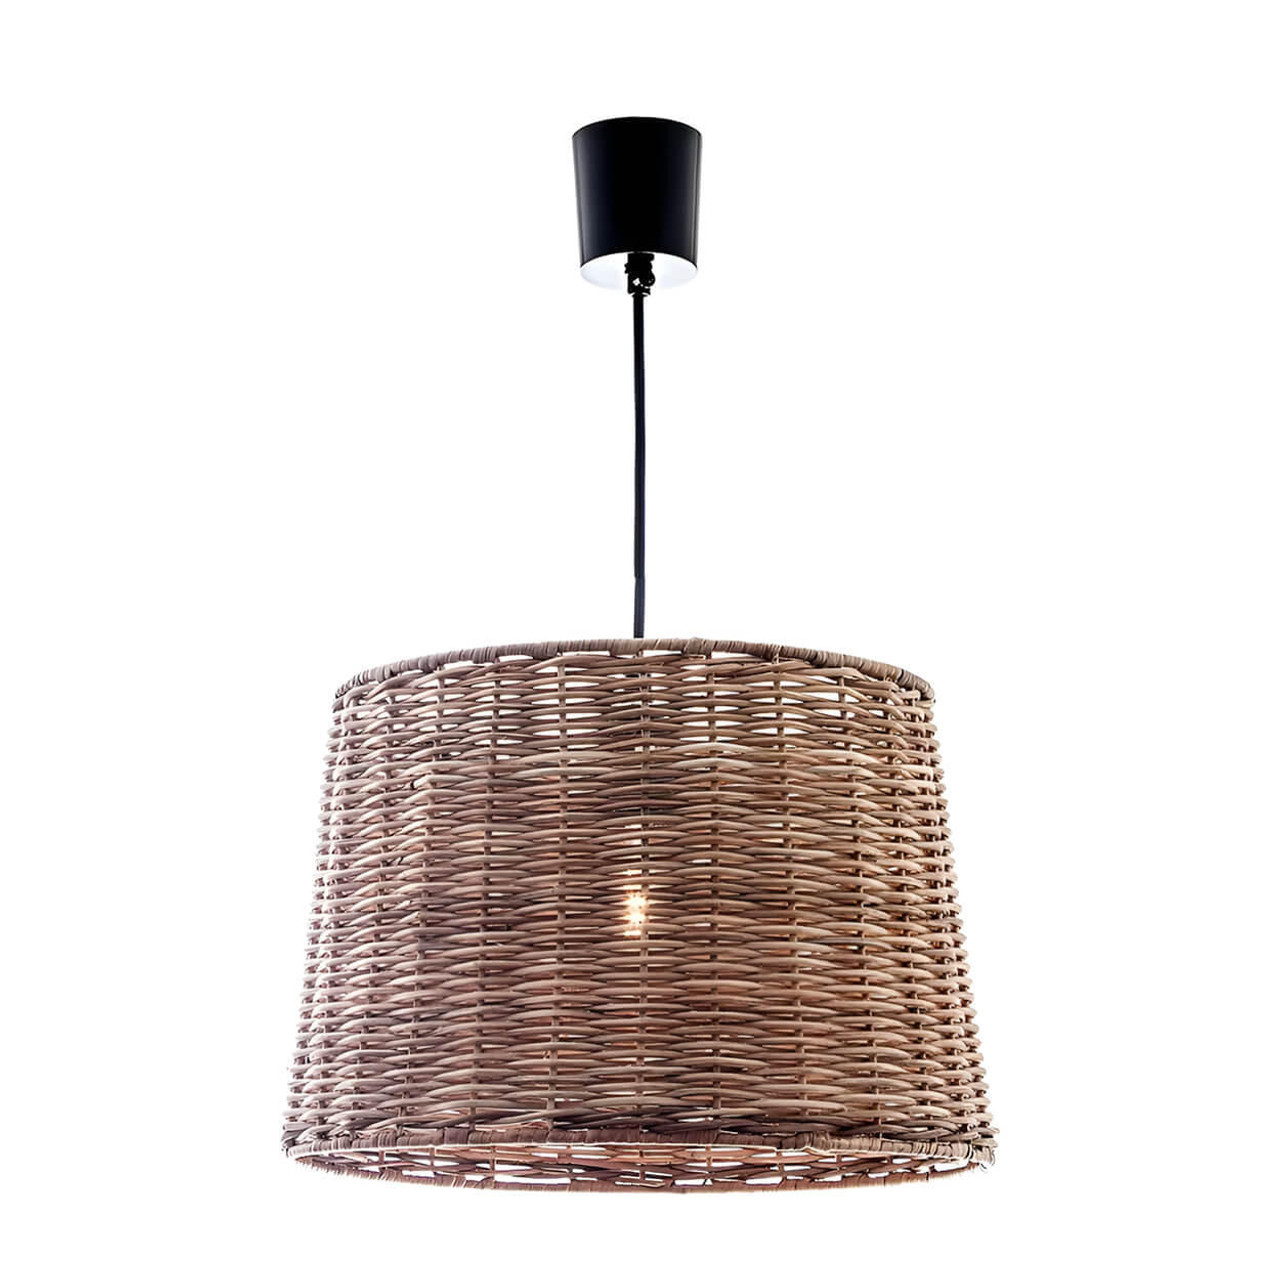  Emac & Lawton Rattan Round Ceiling Pendant Large Natural 